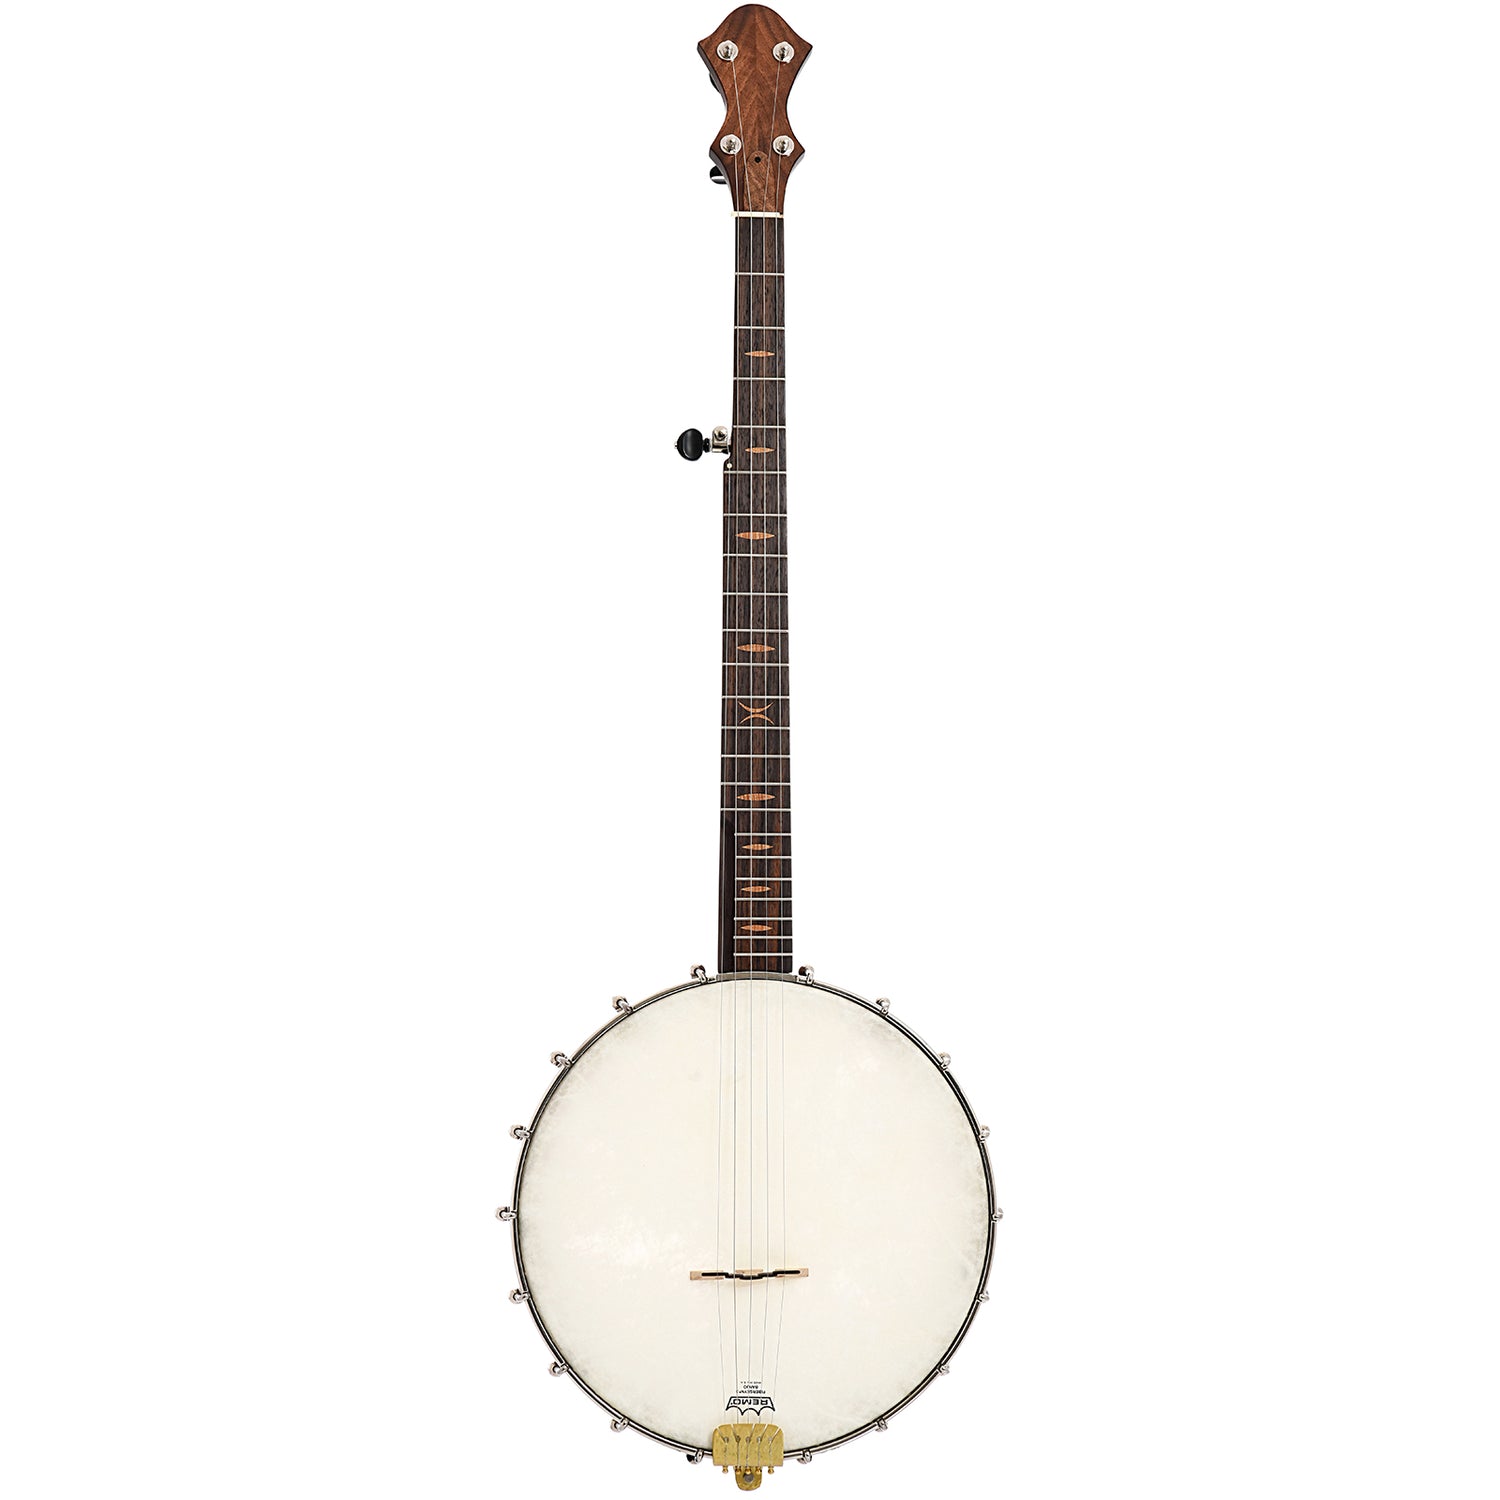 Full front of Pattison 12" Whyte Laydie Banjo, Maple, #97B